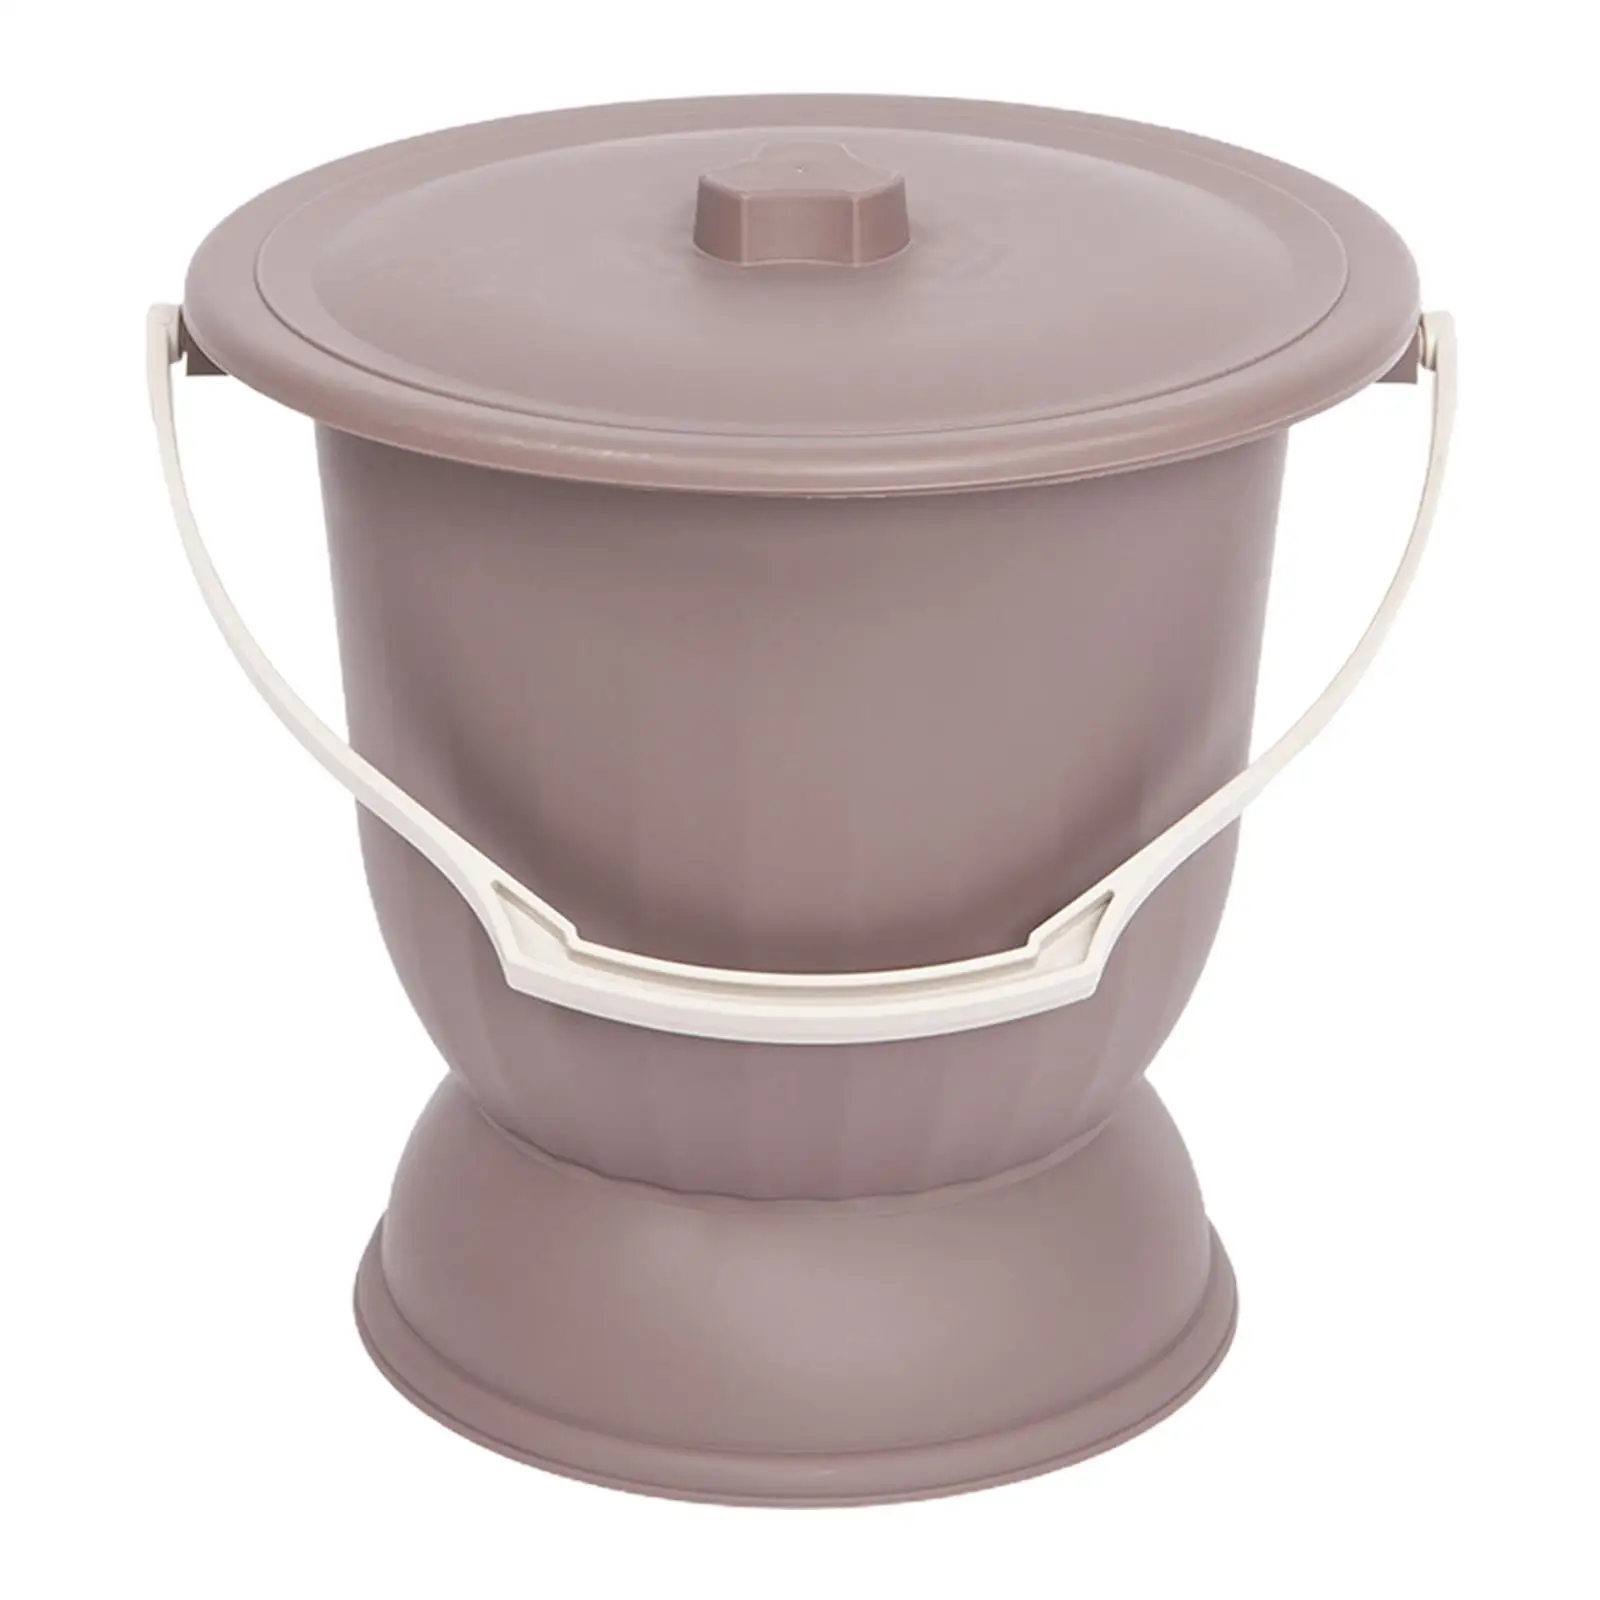 Household Spittoon with Lid Thickened Chamber Pot Urinal Night Pot for Kids Adults Woman Elder Children